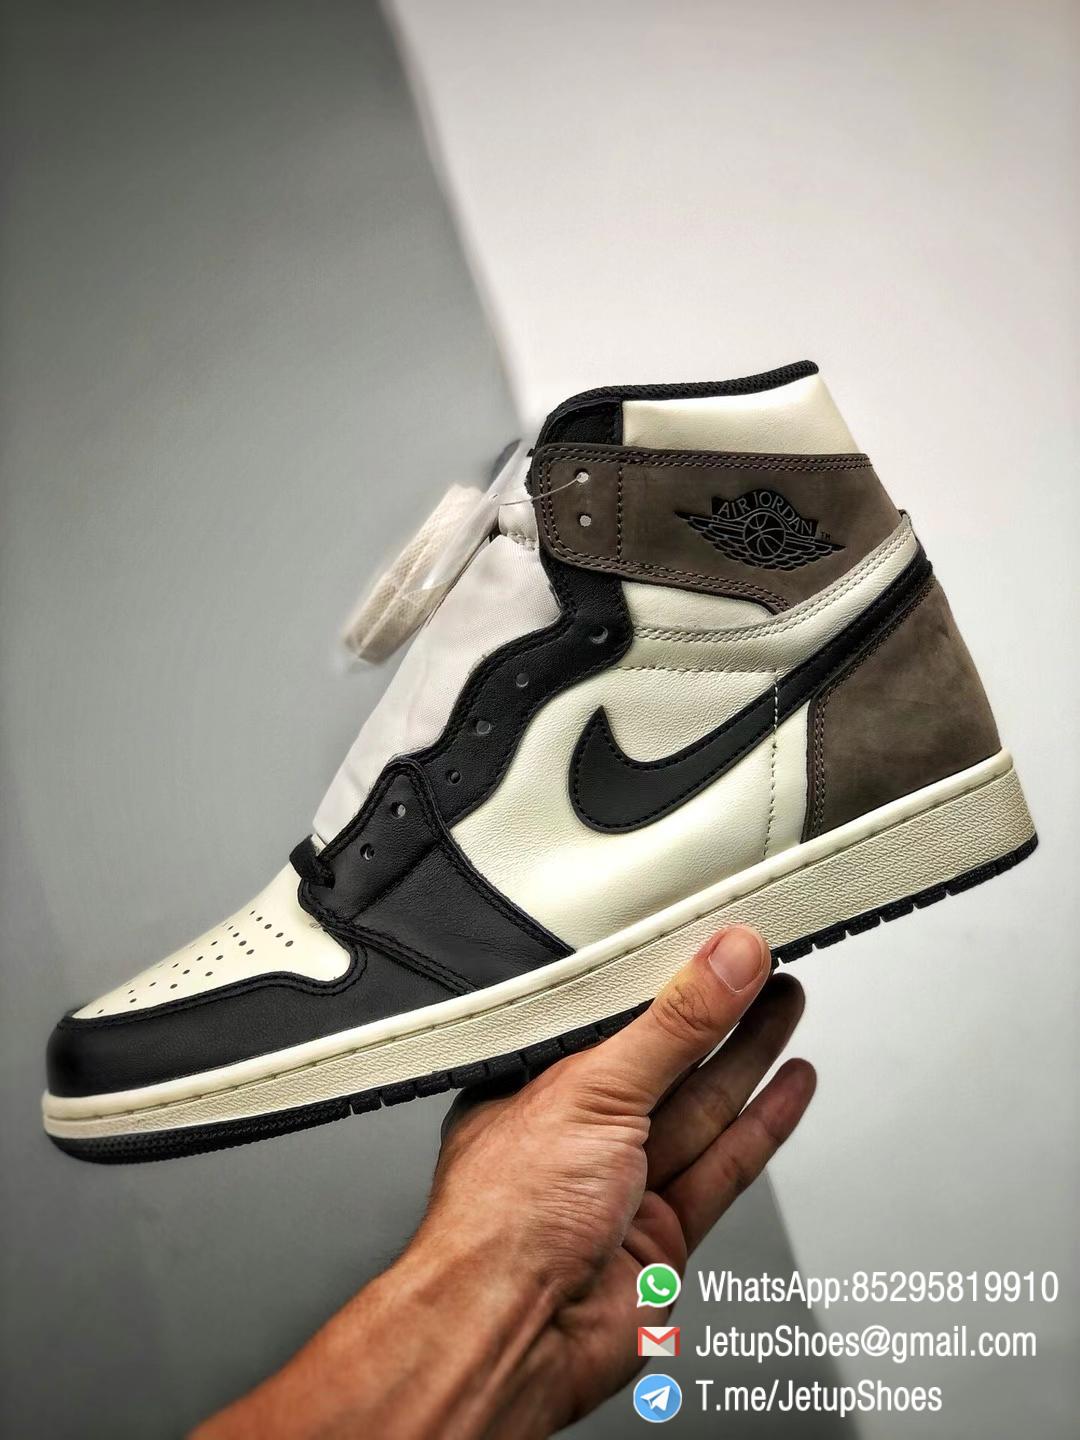 Best Replica Air Jordan 1 Retro High OG Dark Mocha Off white Leather Base and Black Overylays Top Quality Sneakers 06